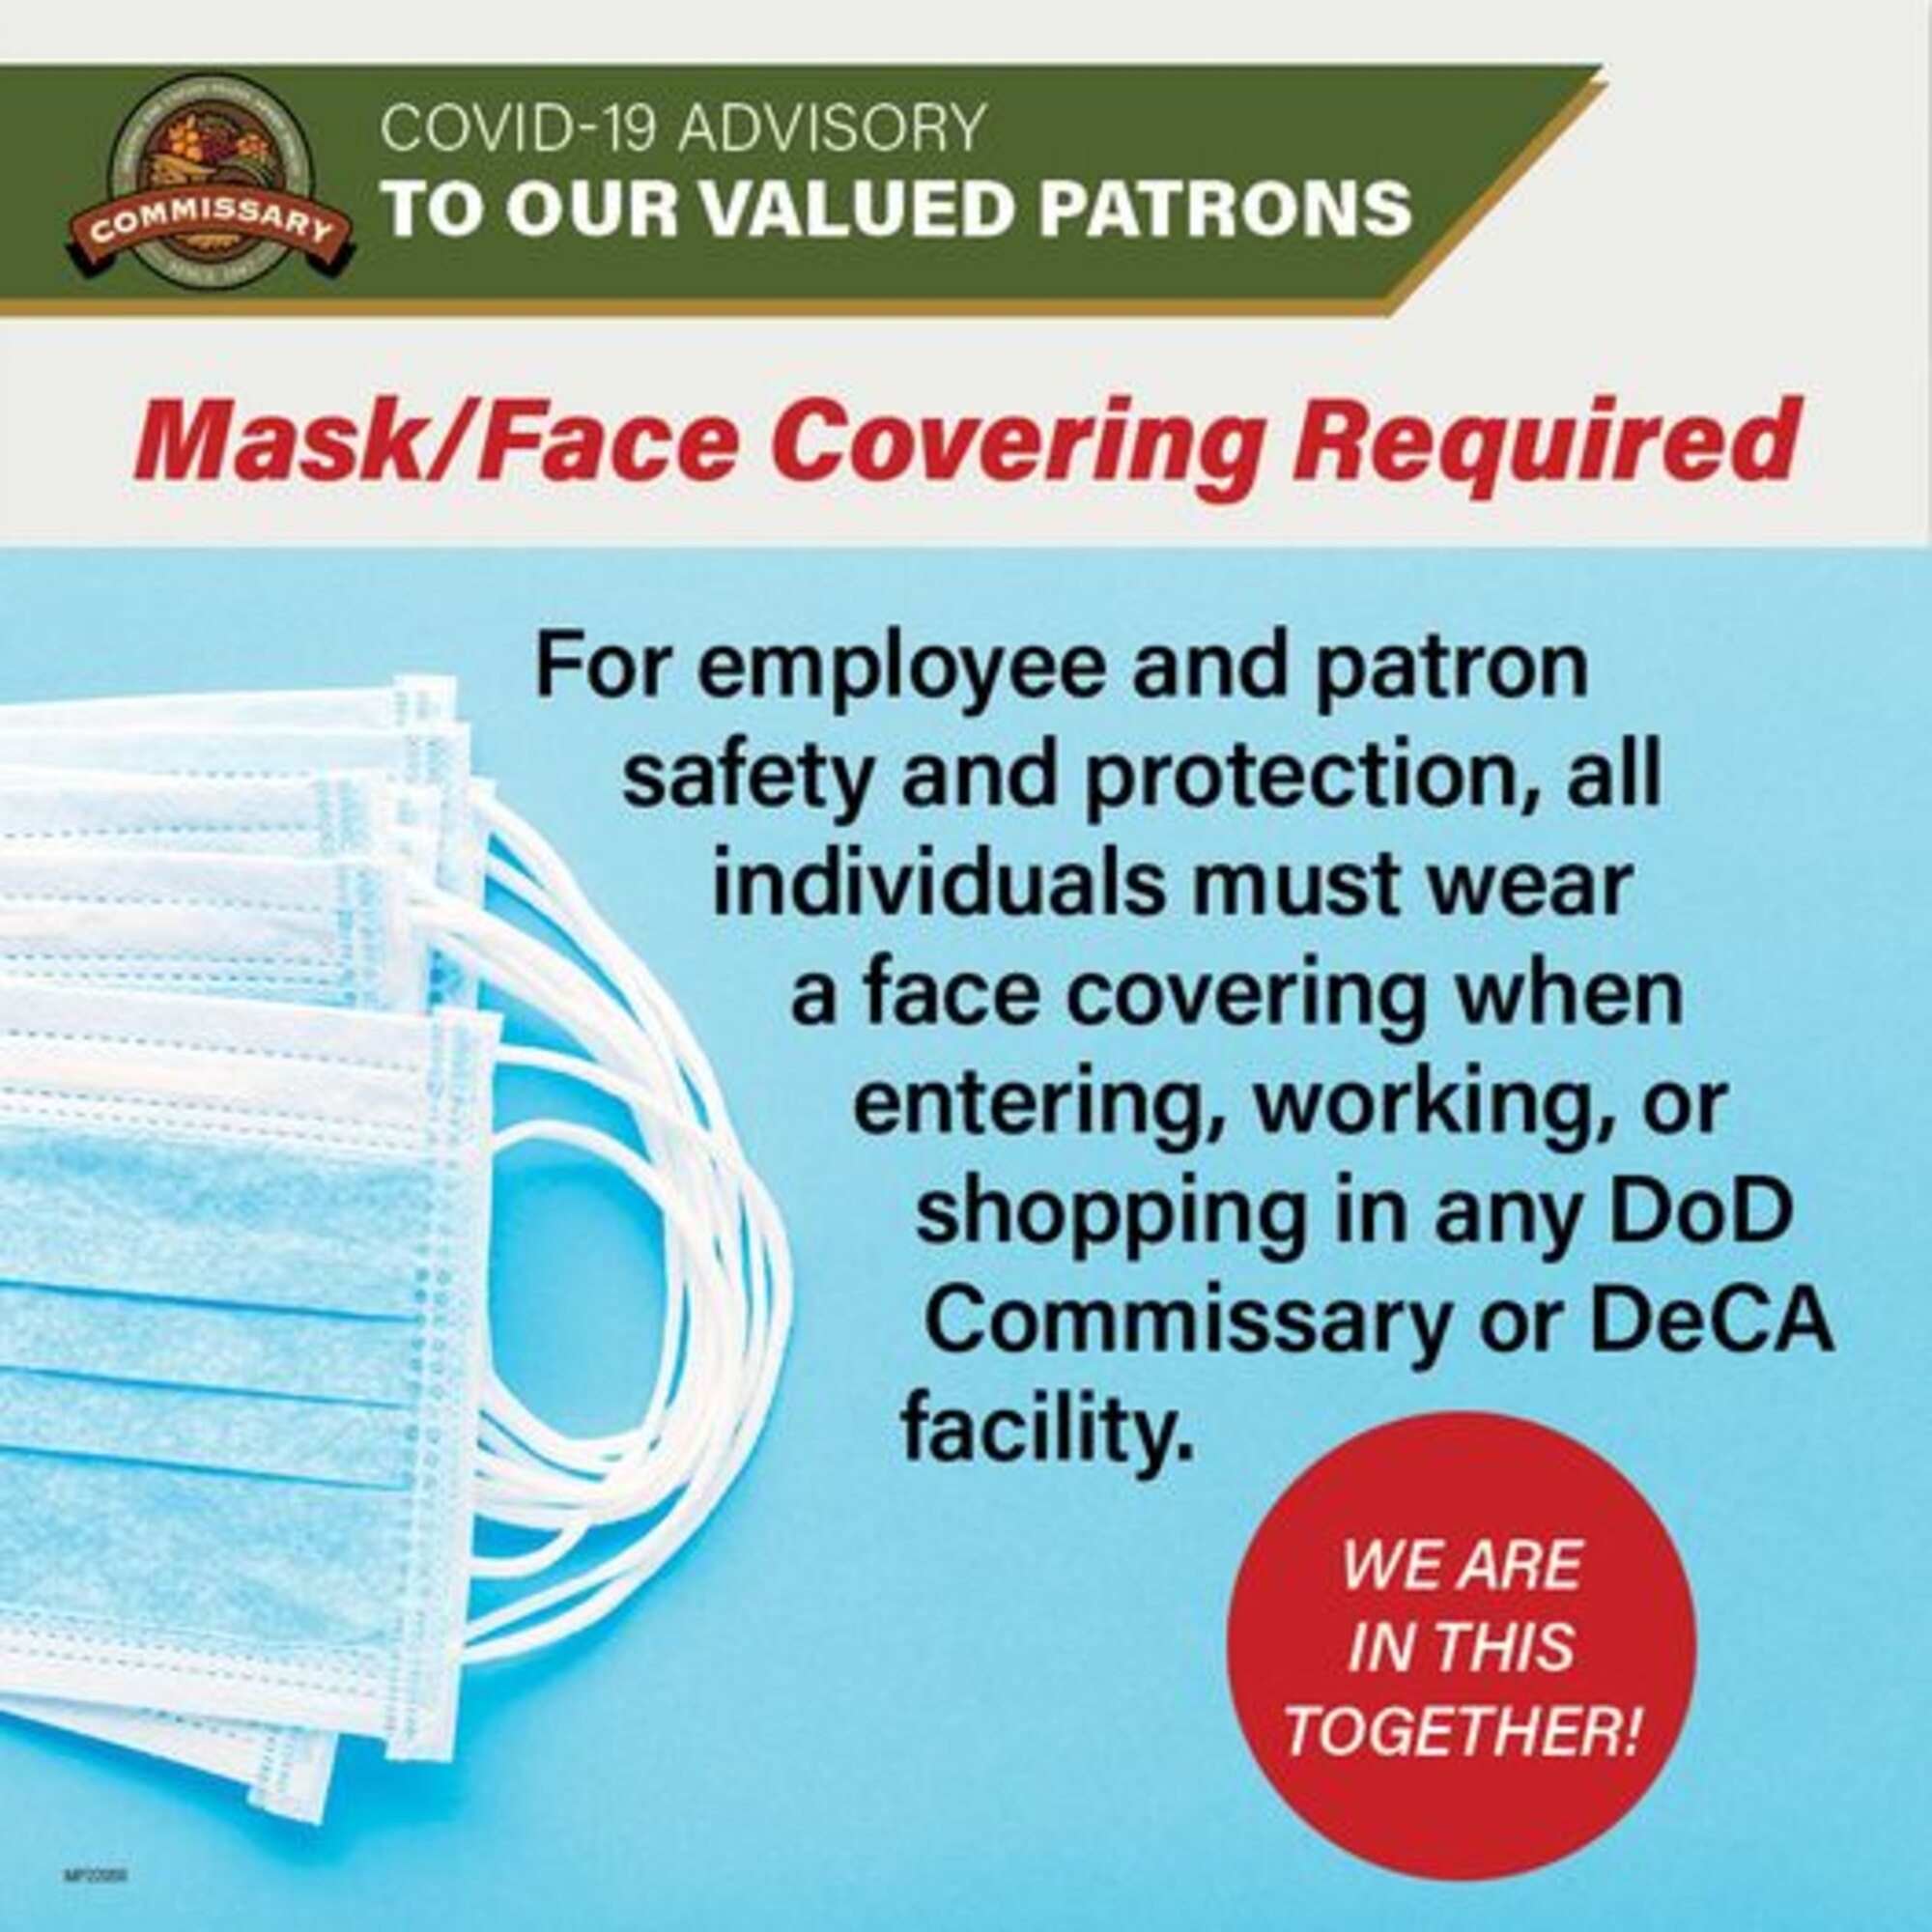 The Defense Commissary Agency requires patrons and employees at all commissary and DeCA facilities to wear a mask/face covering. This includes all DeCA facilities across Joint Base San Antonio.